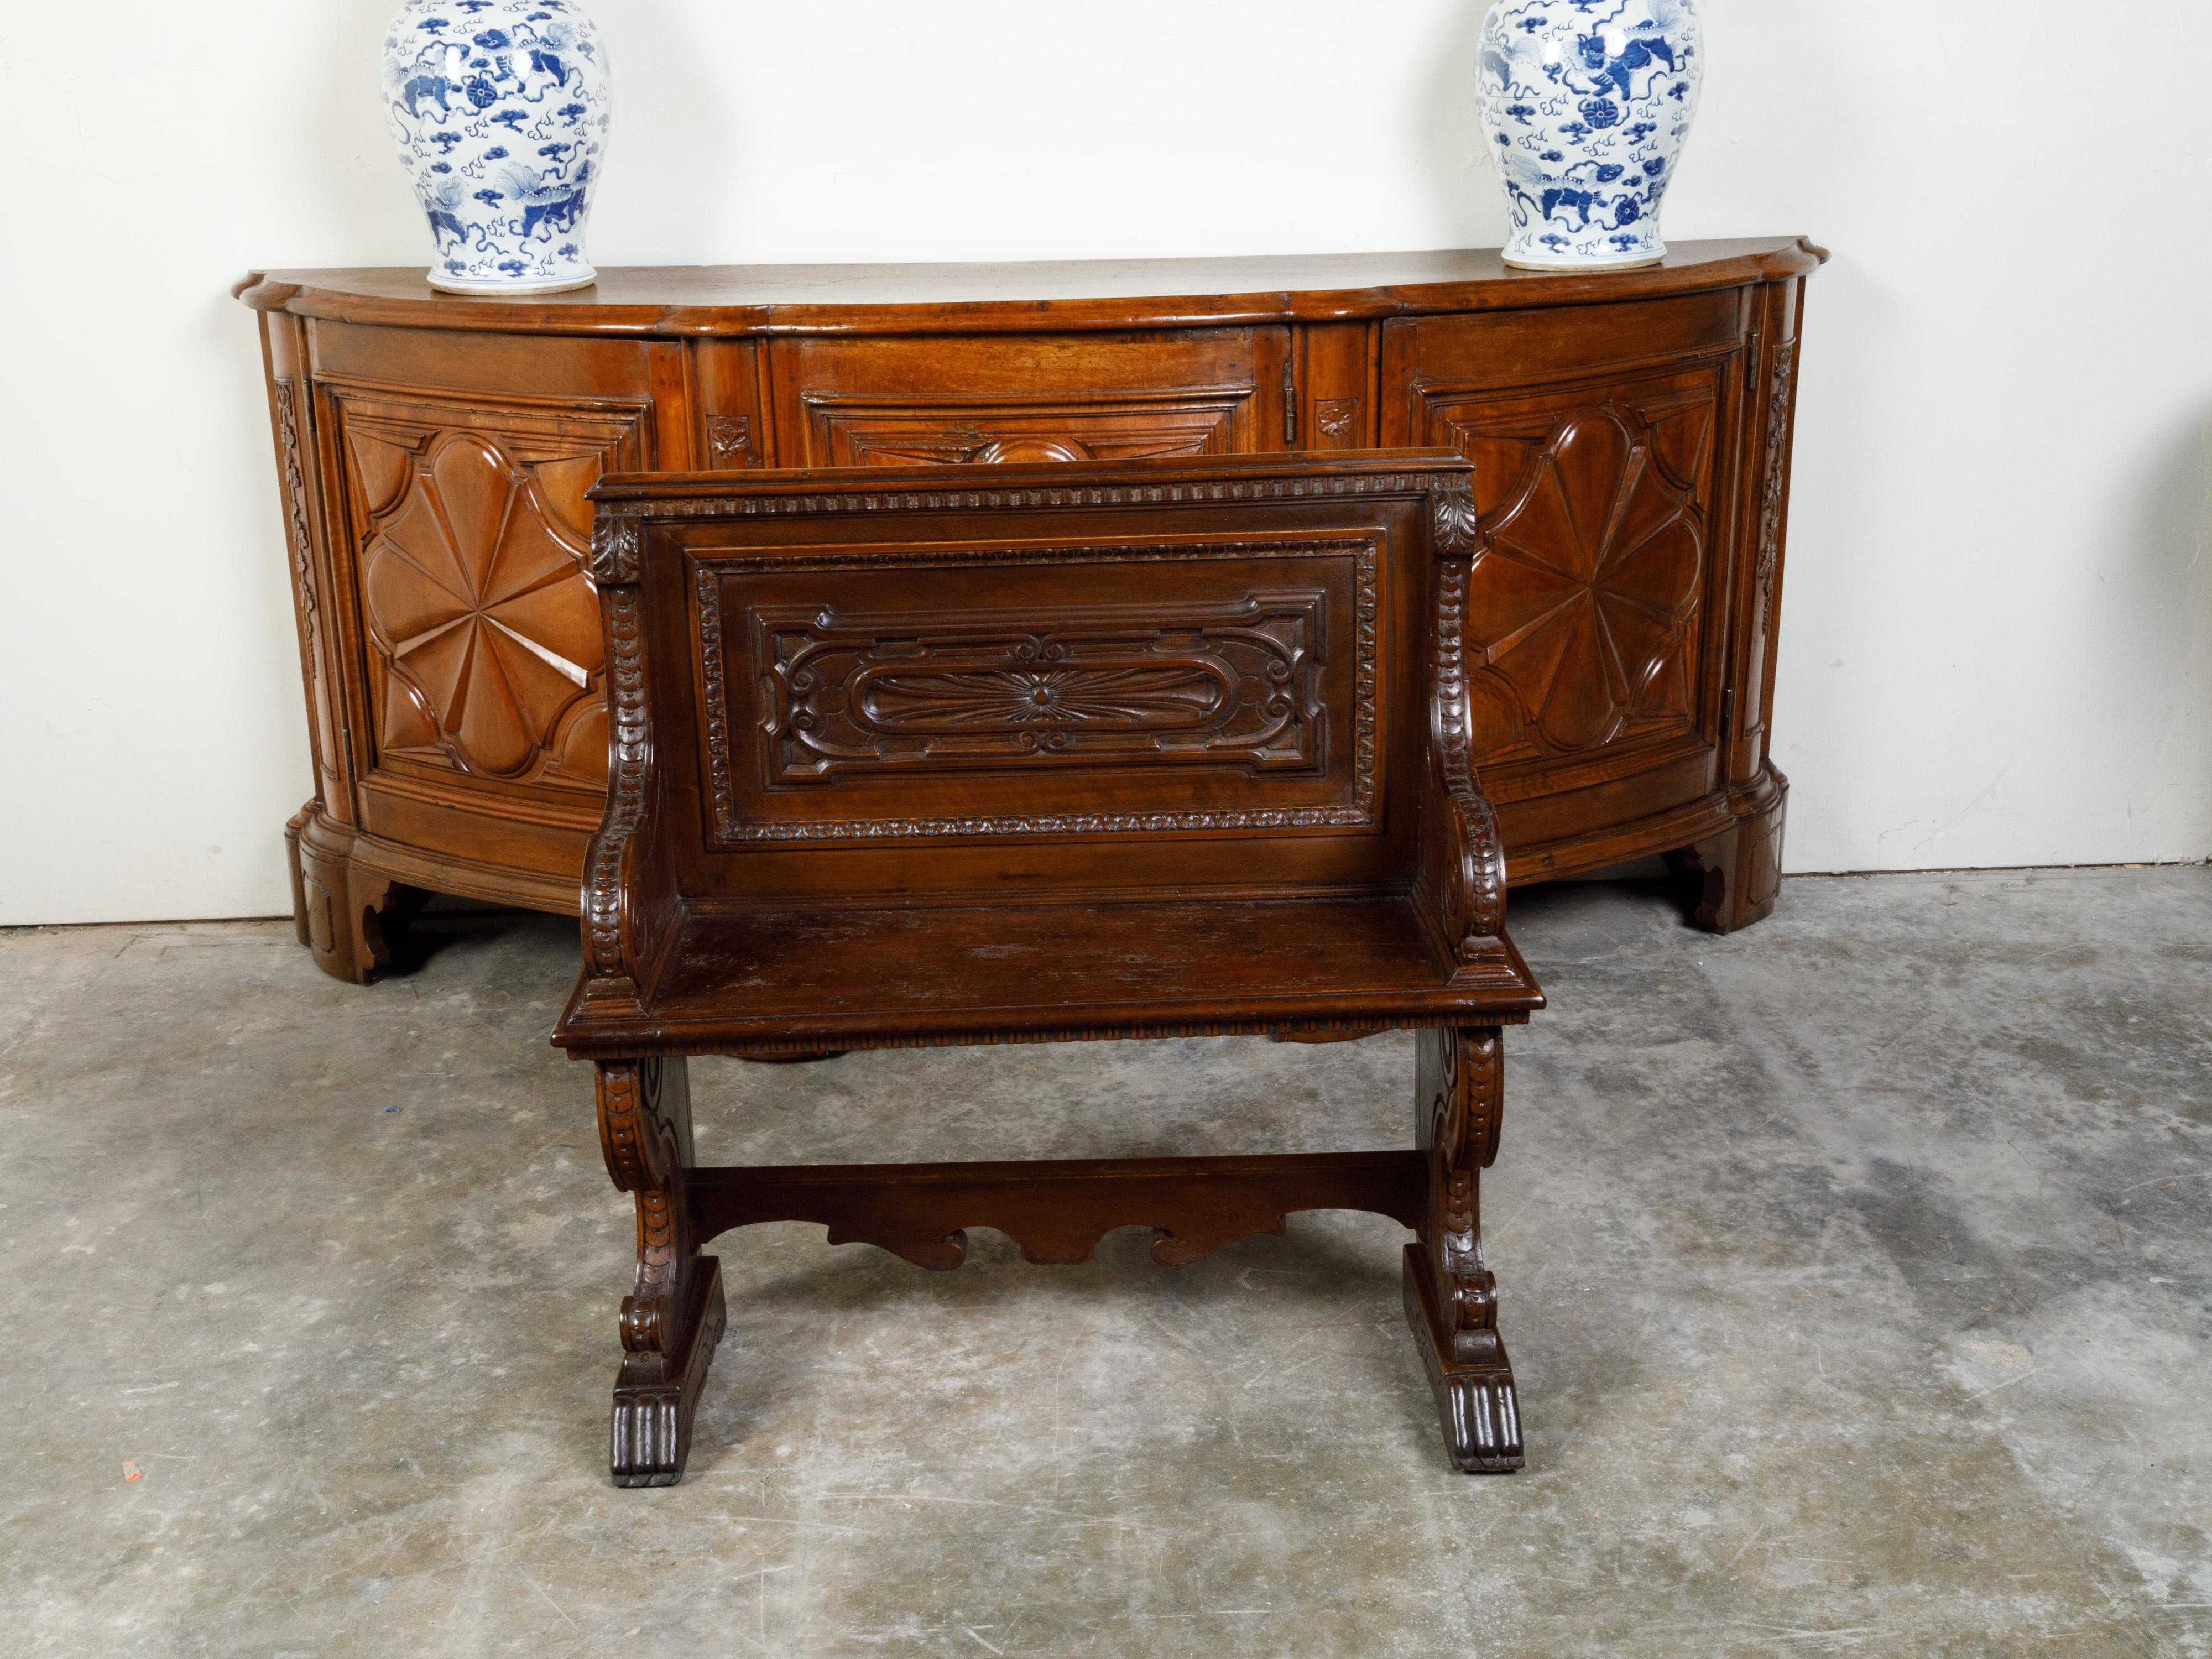 An Italian walnut hall bench from the 19th century, with carved back, voluted arms and stylized paw feet. Created in Italy during the 19th century, this walnut hall bench features a straight back with carved panel, connected to two large voluted